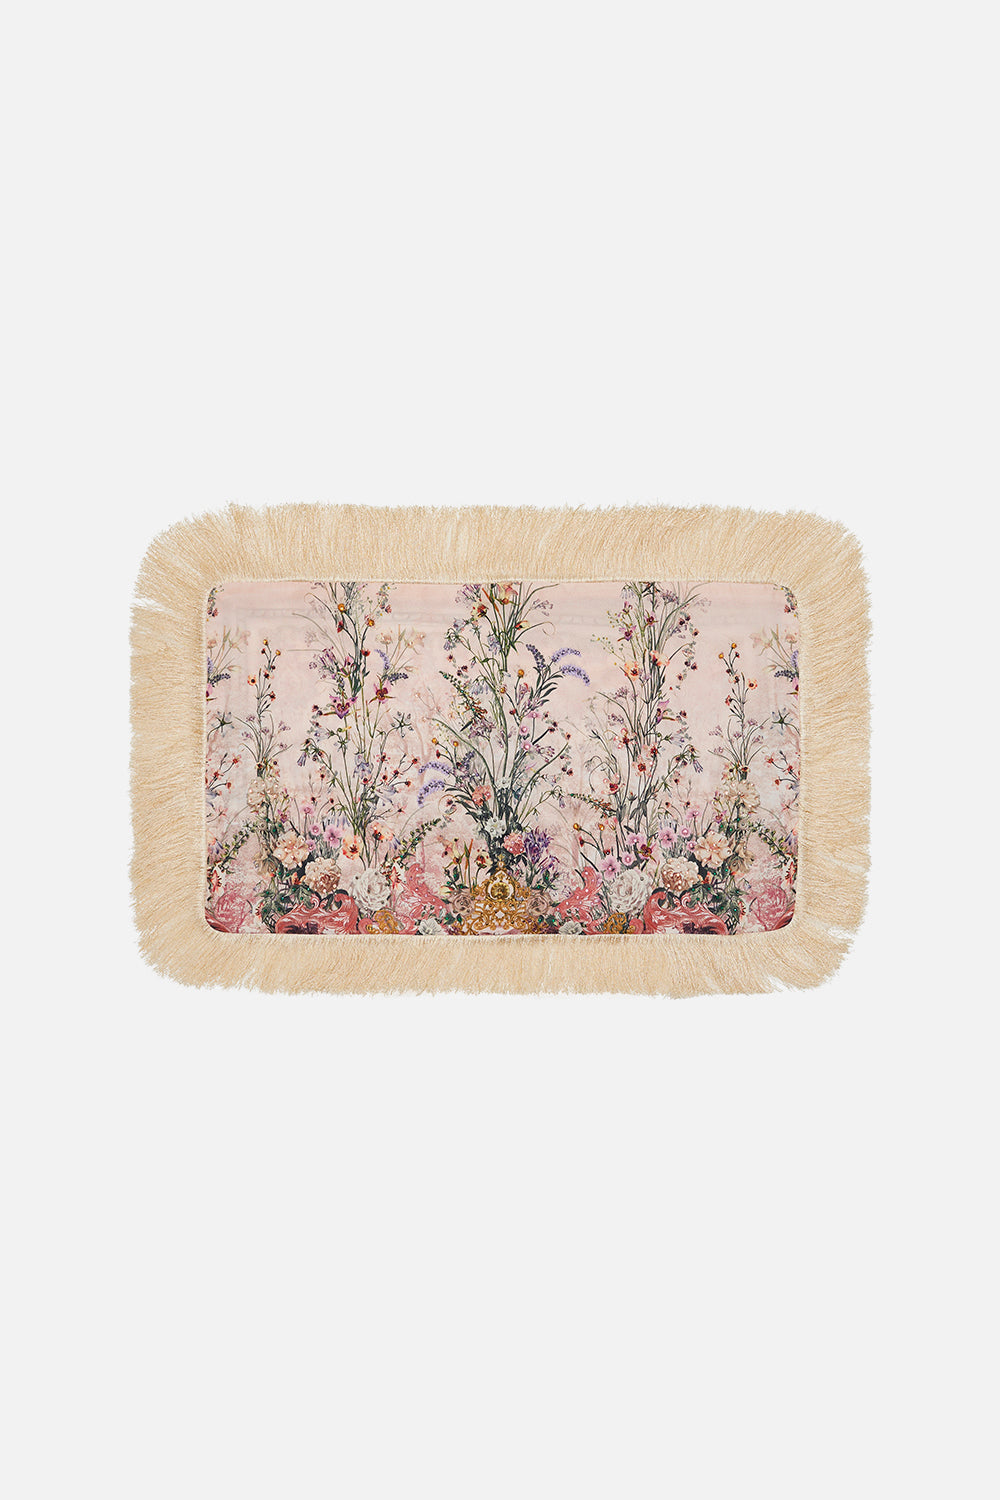 Product view of VILLA CAMILLA rectangle pink floral cushion in Kissed By The Prince print